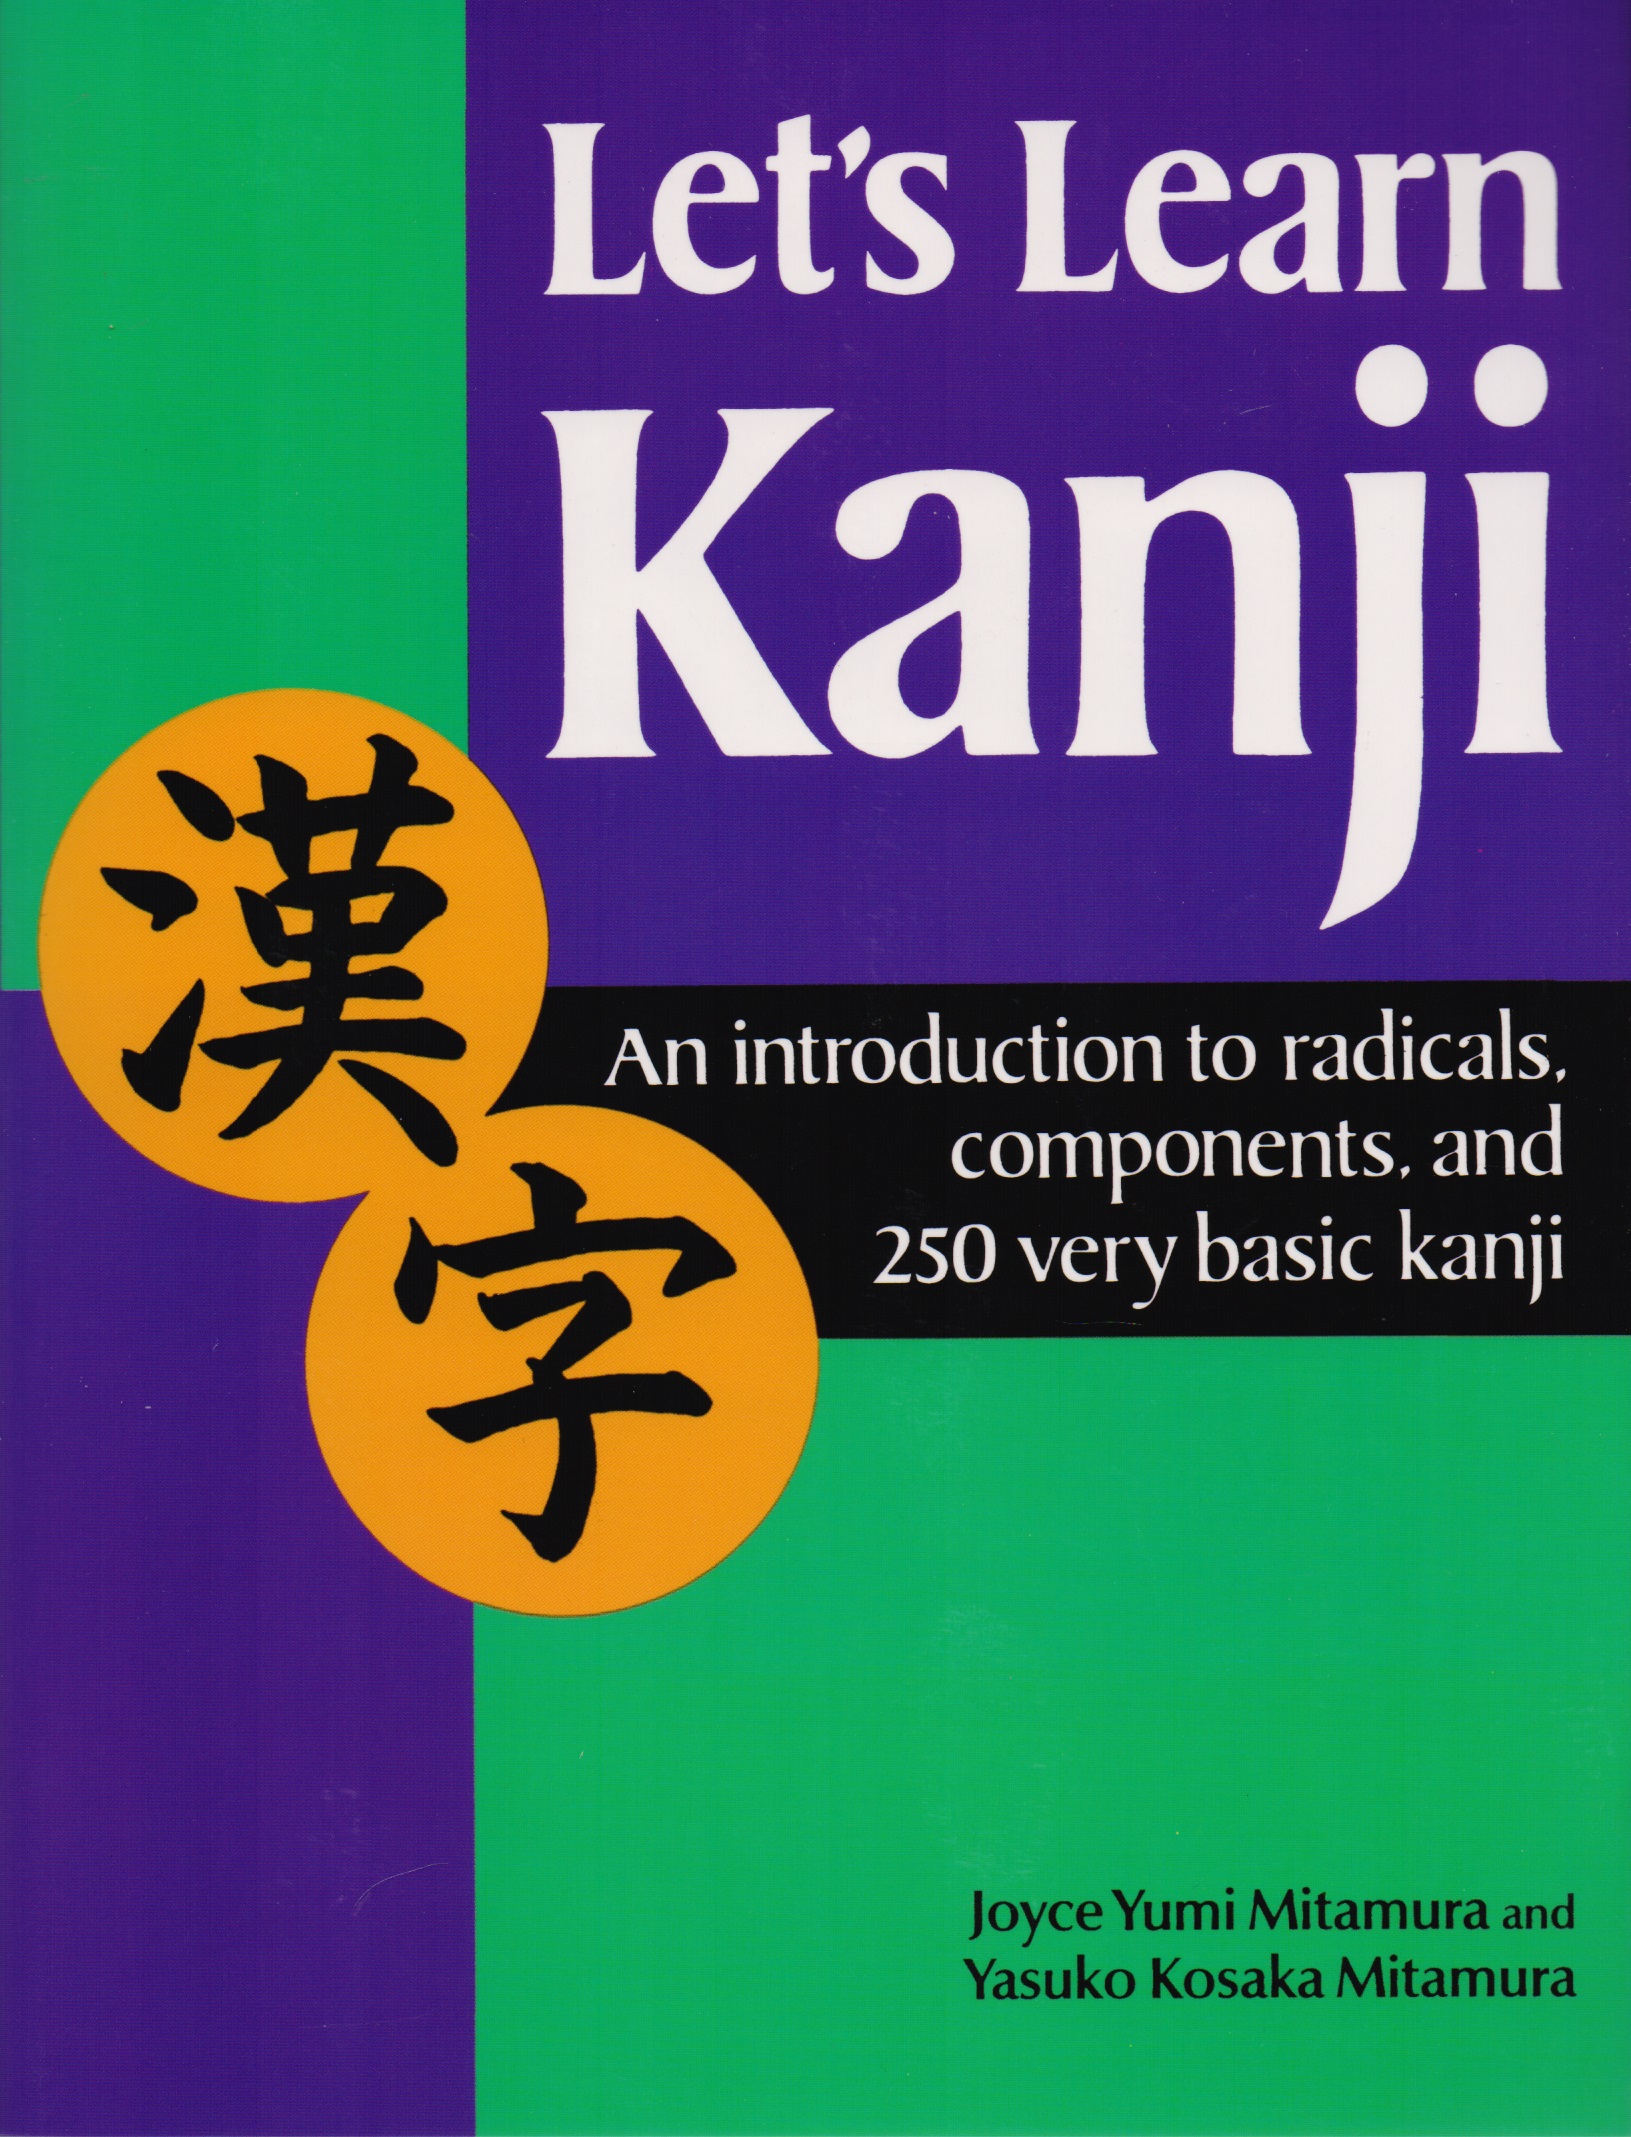 Lets Learn Kanji: An Introduction to Radicals, Components and 250 Very Basic Kanji  student uniforms new style japanese two sailor suit female college class jk uniform pleated skirt student set